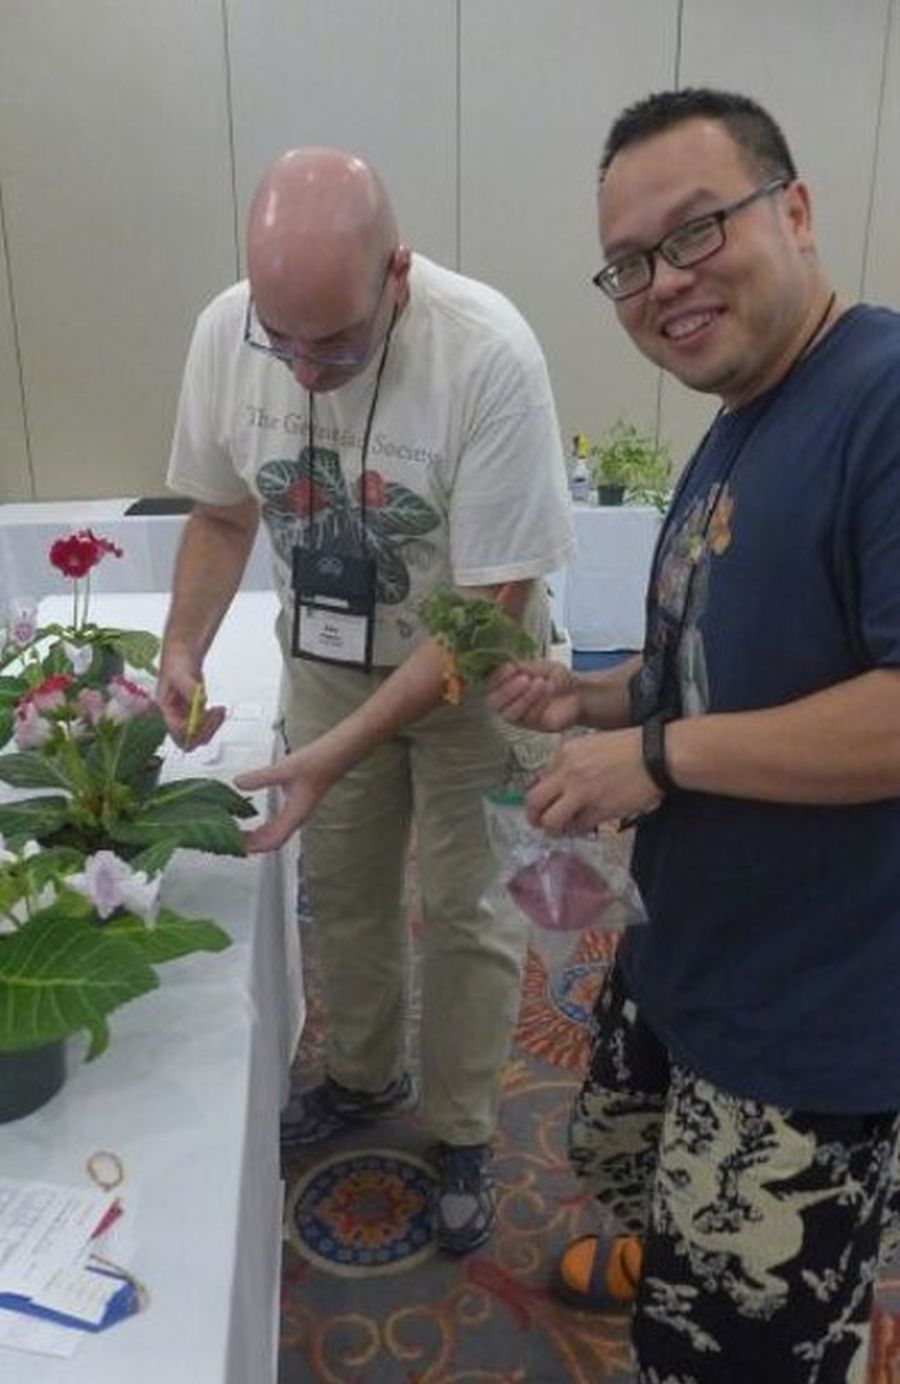 Jay Sespico sharing cuttings of his show plants at breakdown with Wen Fang